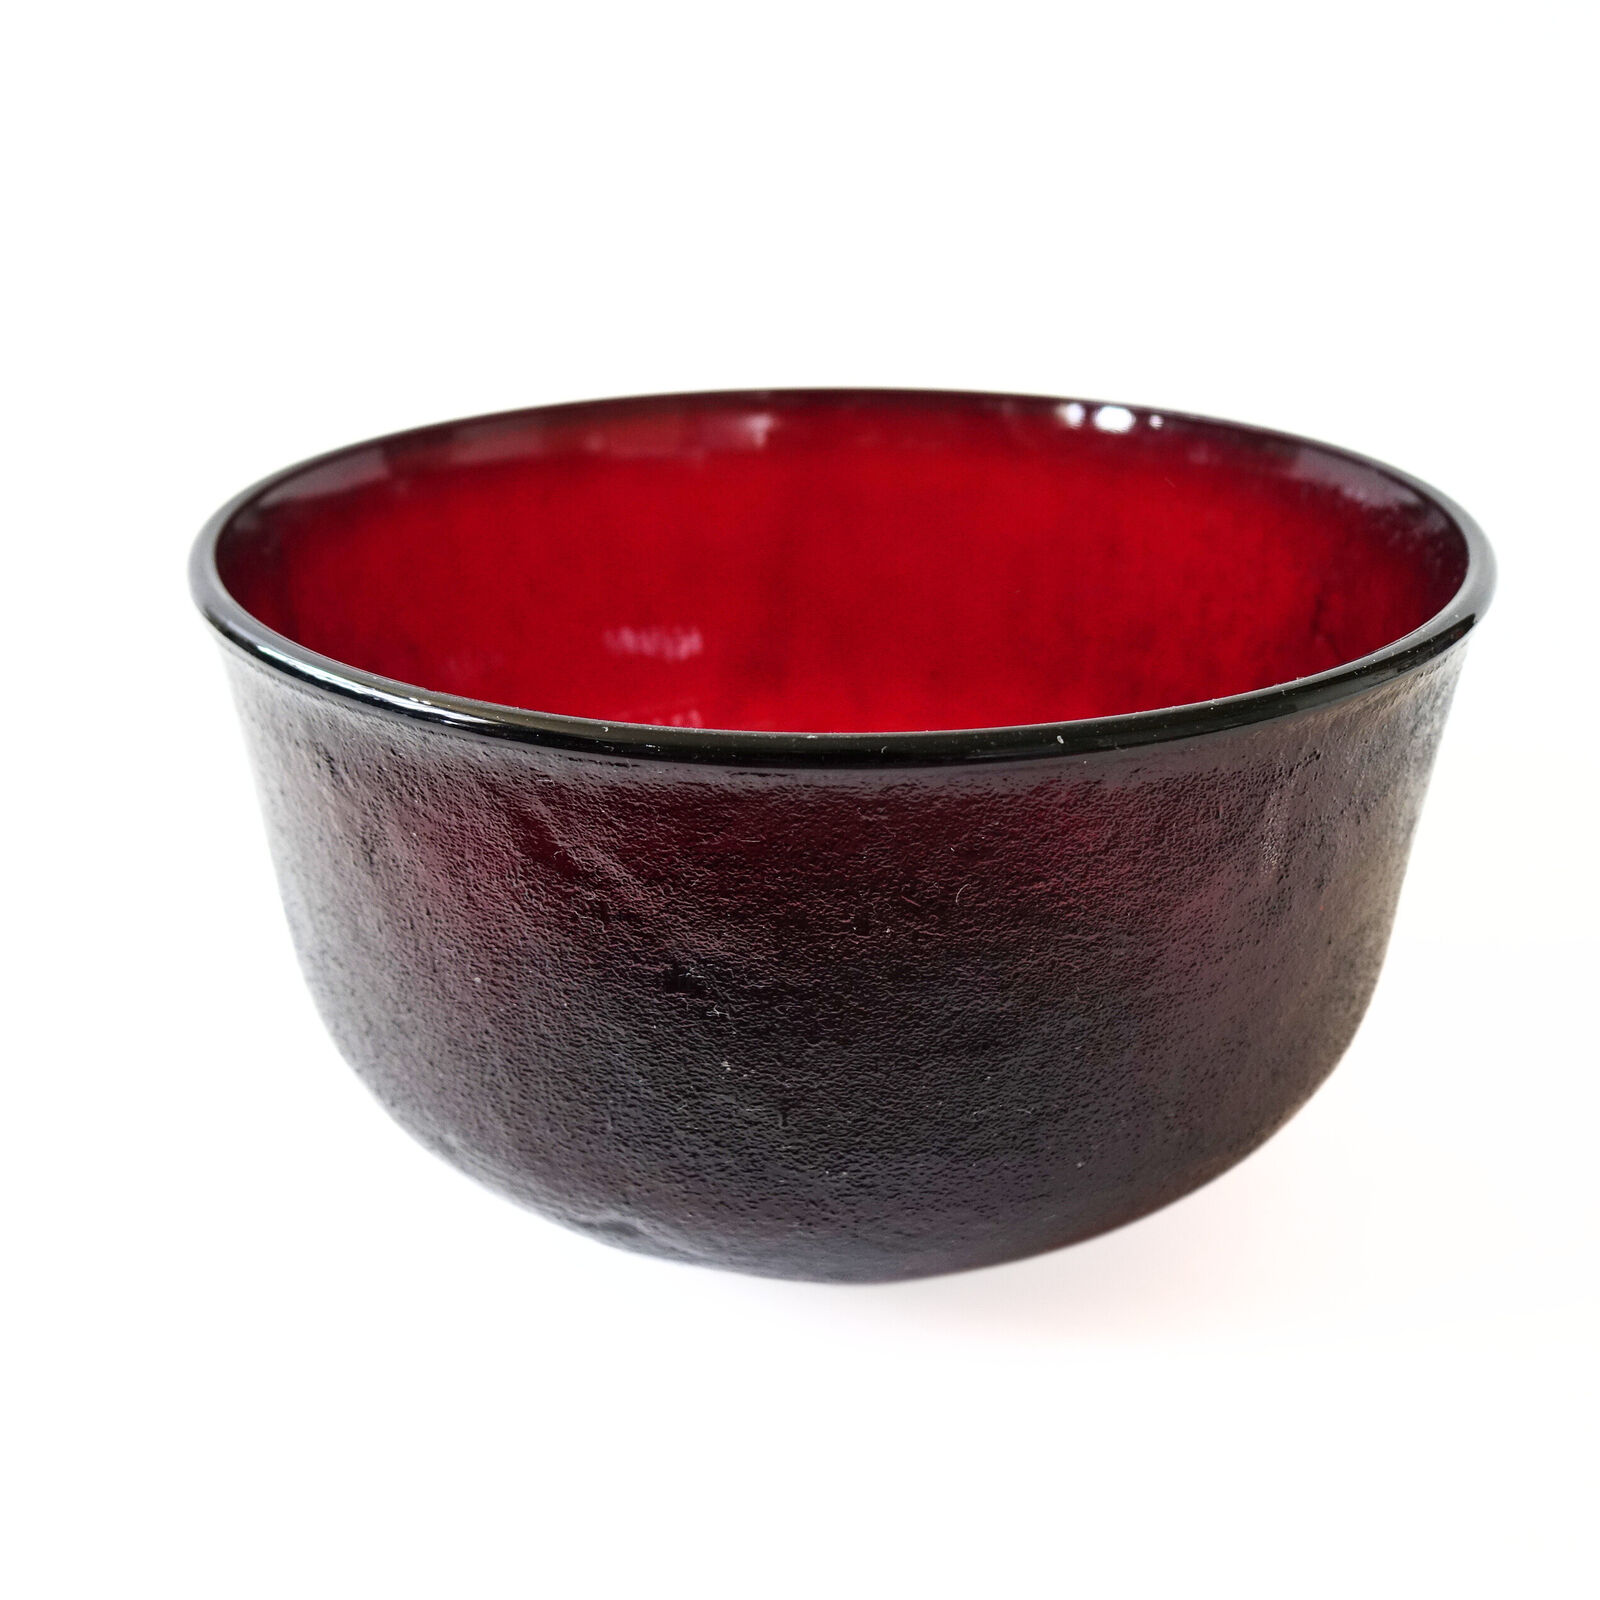 Vintage large retro pressed red glass bowl from Sweden 1960s